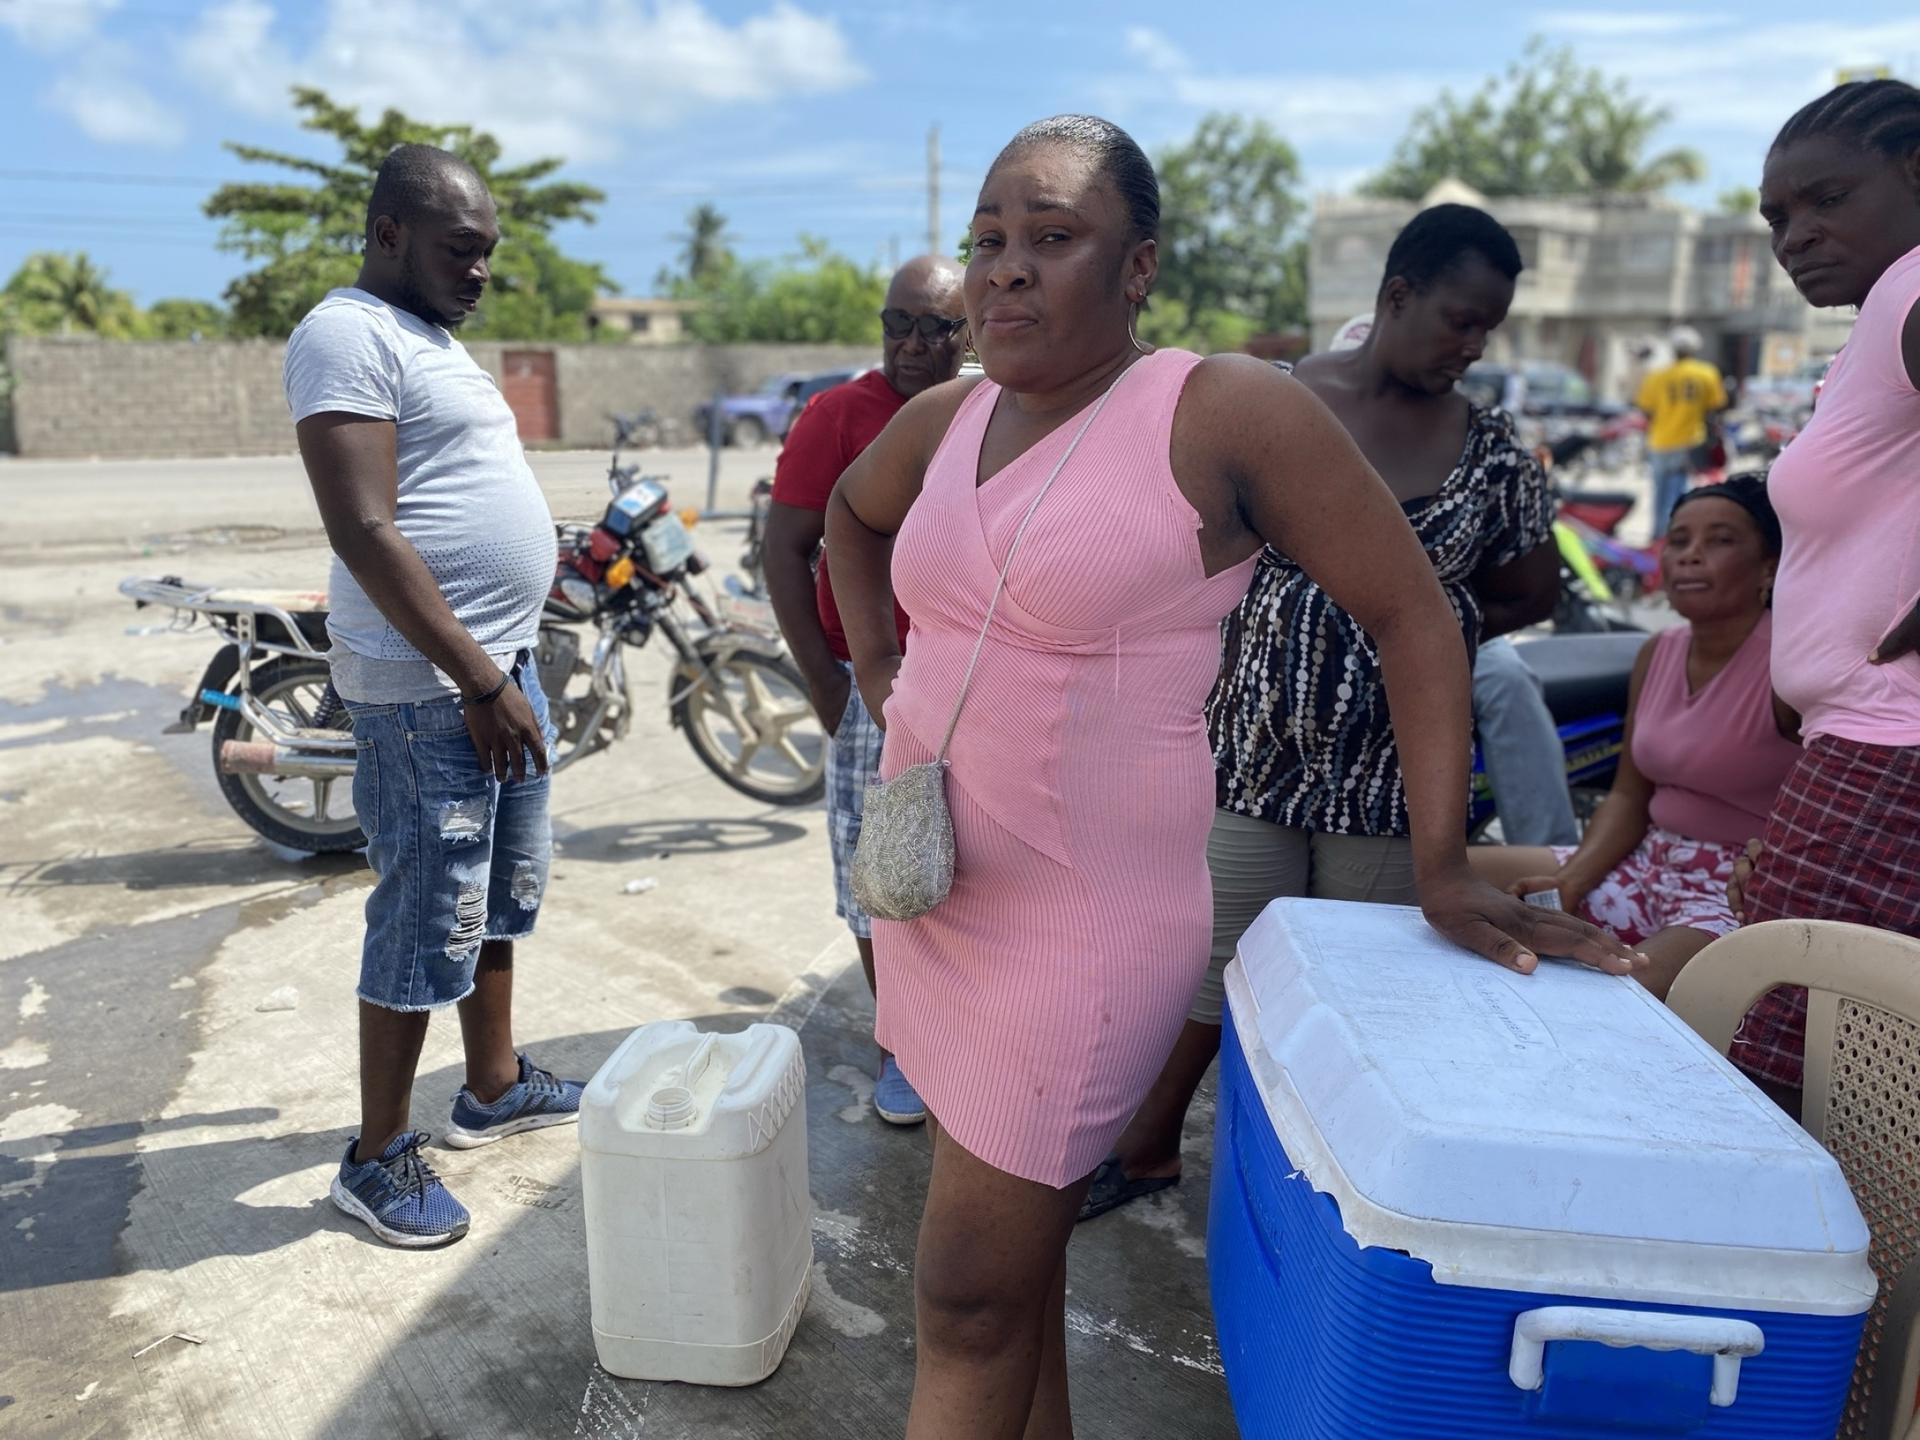 Irlene Devereux, 27, sells shaved ice drenched with cherry and passionfruit syrup to crowds at a gas station in Les Cayes, Haiti, in the country's southern peninsula. An ongoing fuel shortage is worsening as powerful gangs control distribution routes. Dev